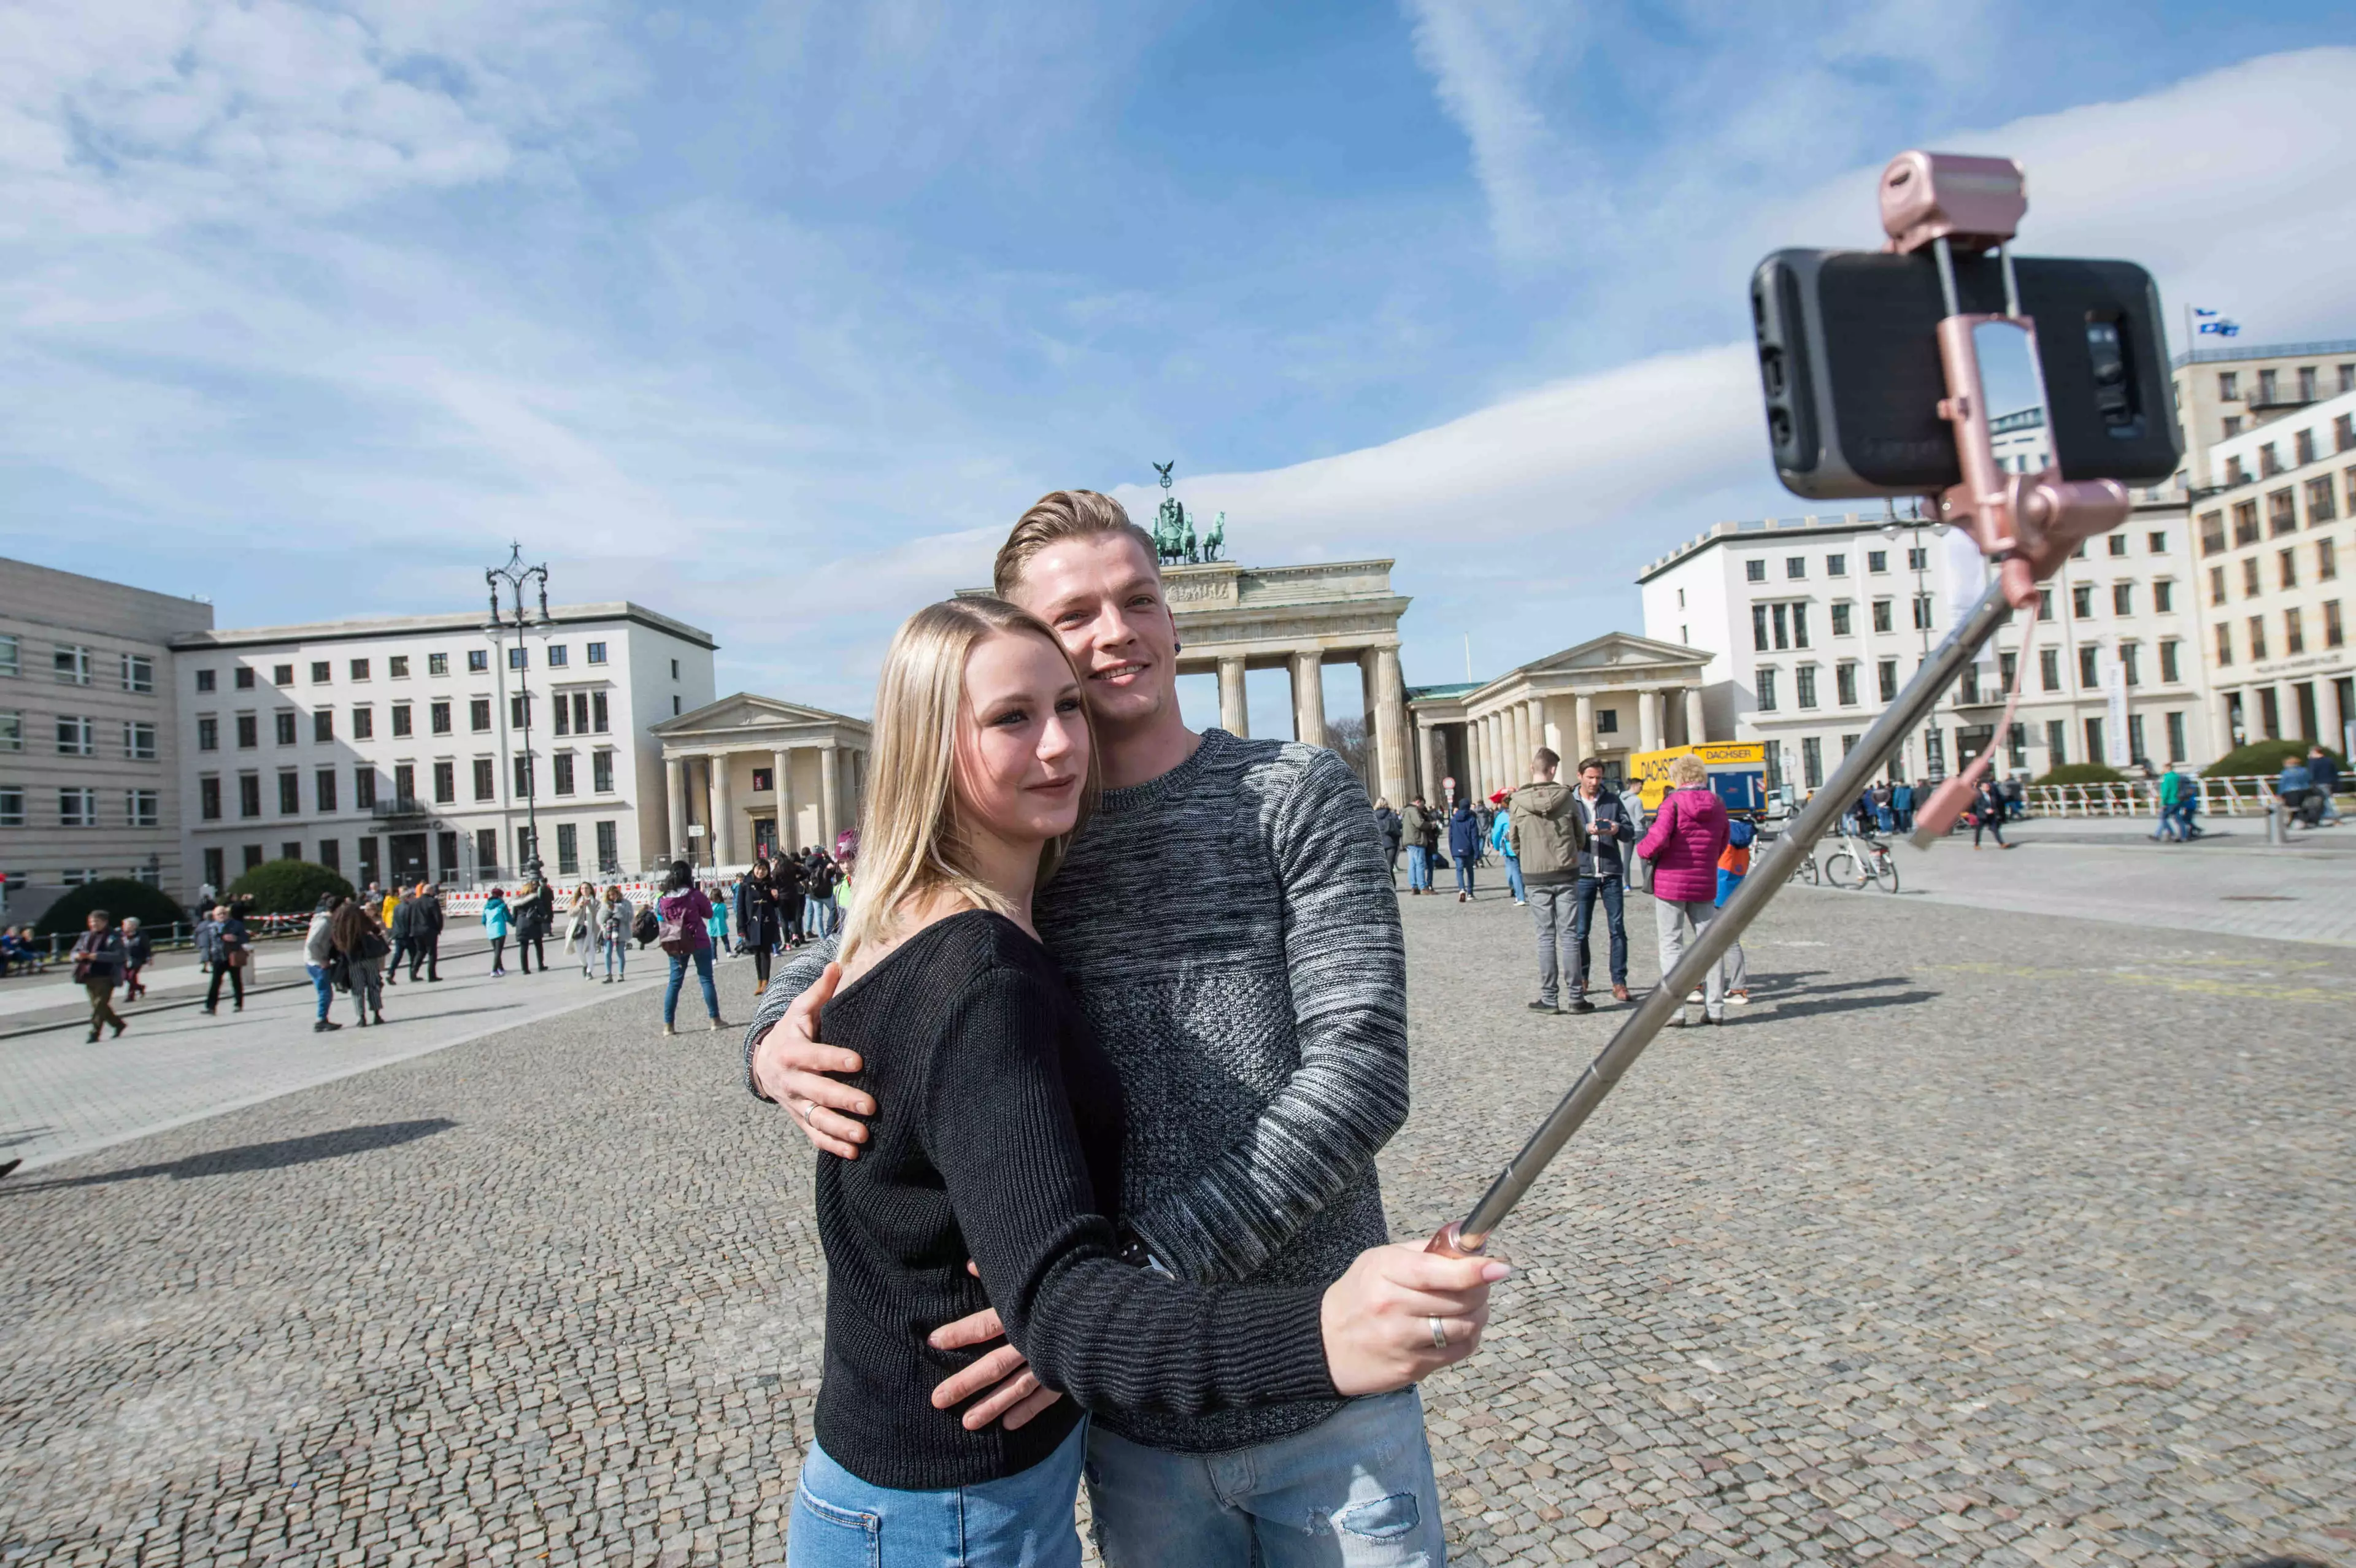 Your selfie-stick is killing Planet Earth, as well as your dignity.